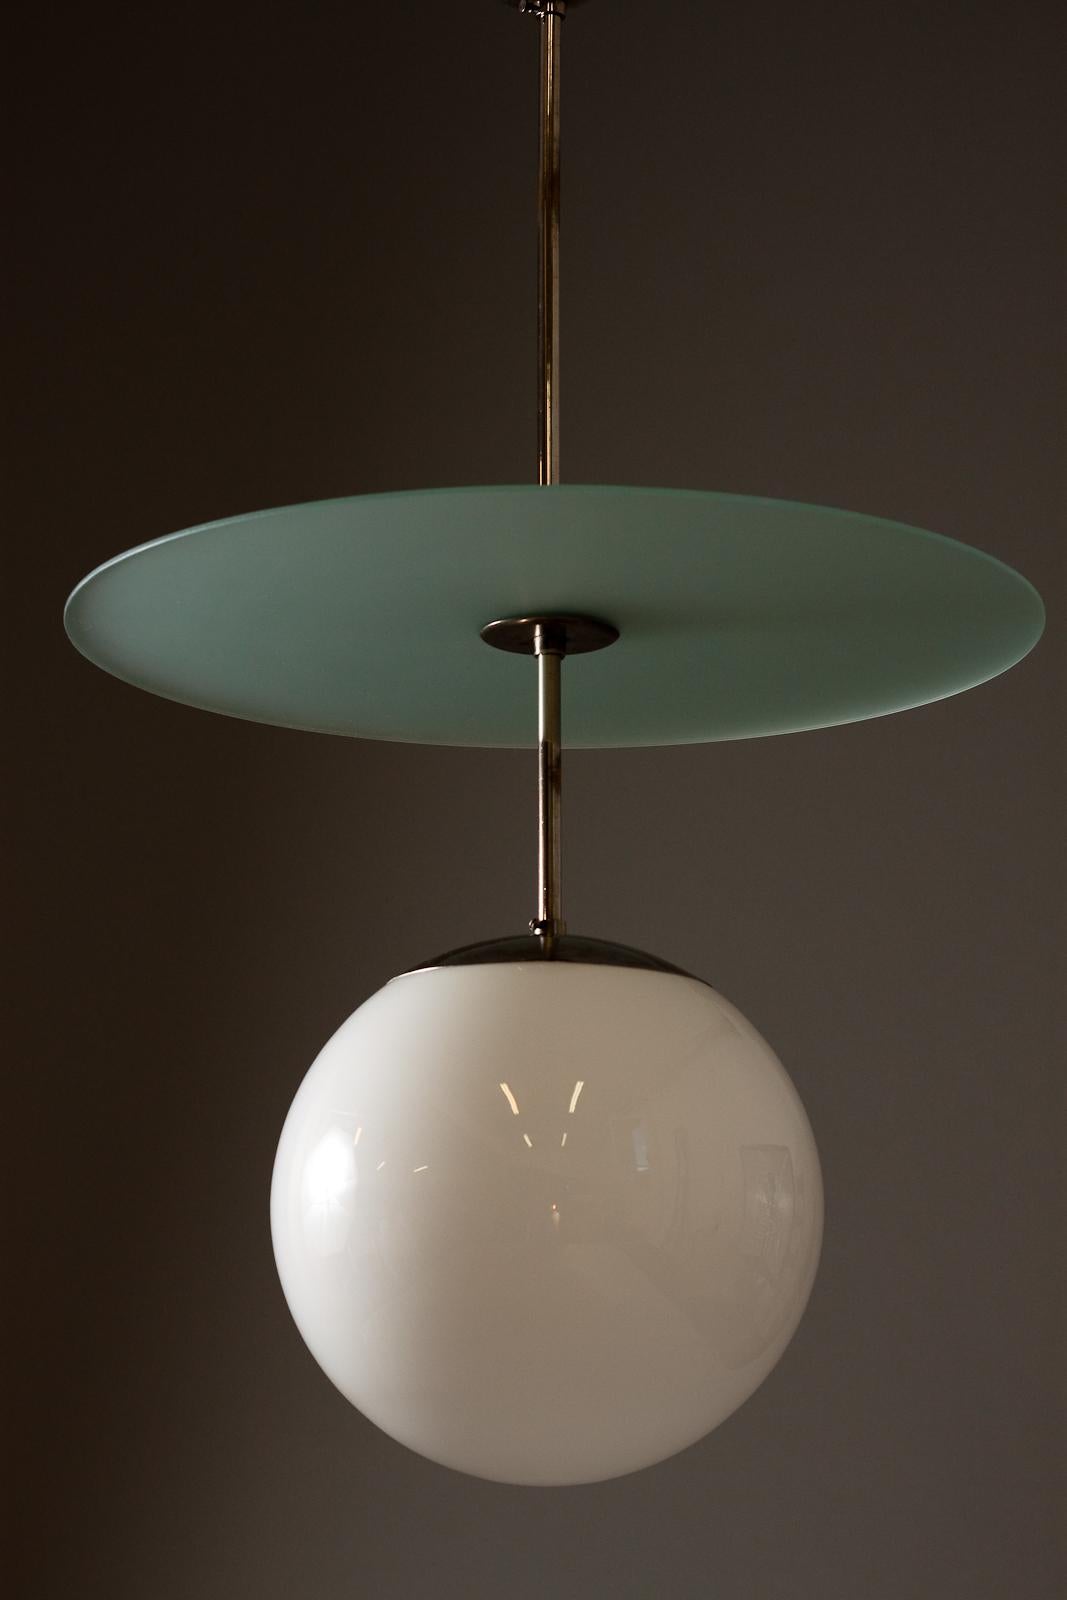 Early Paavo tynell glass pendant for Taito oy, 1930s. 
Finnish modernist glass pendant light rarely seen for sale.